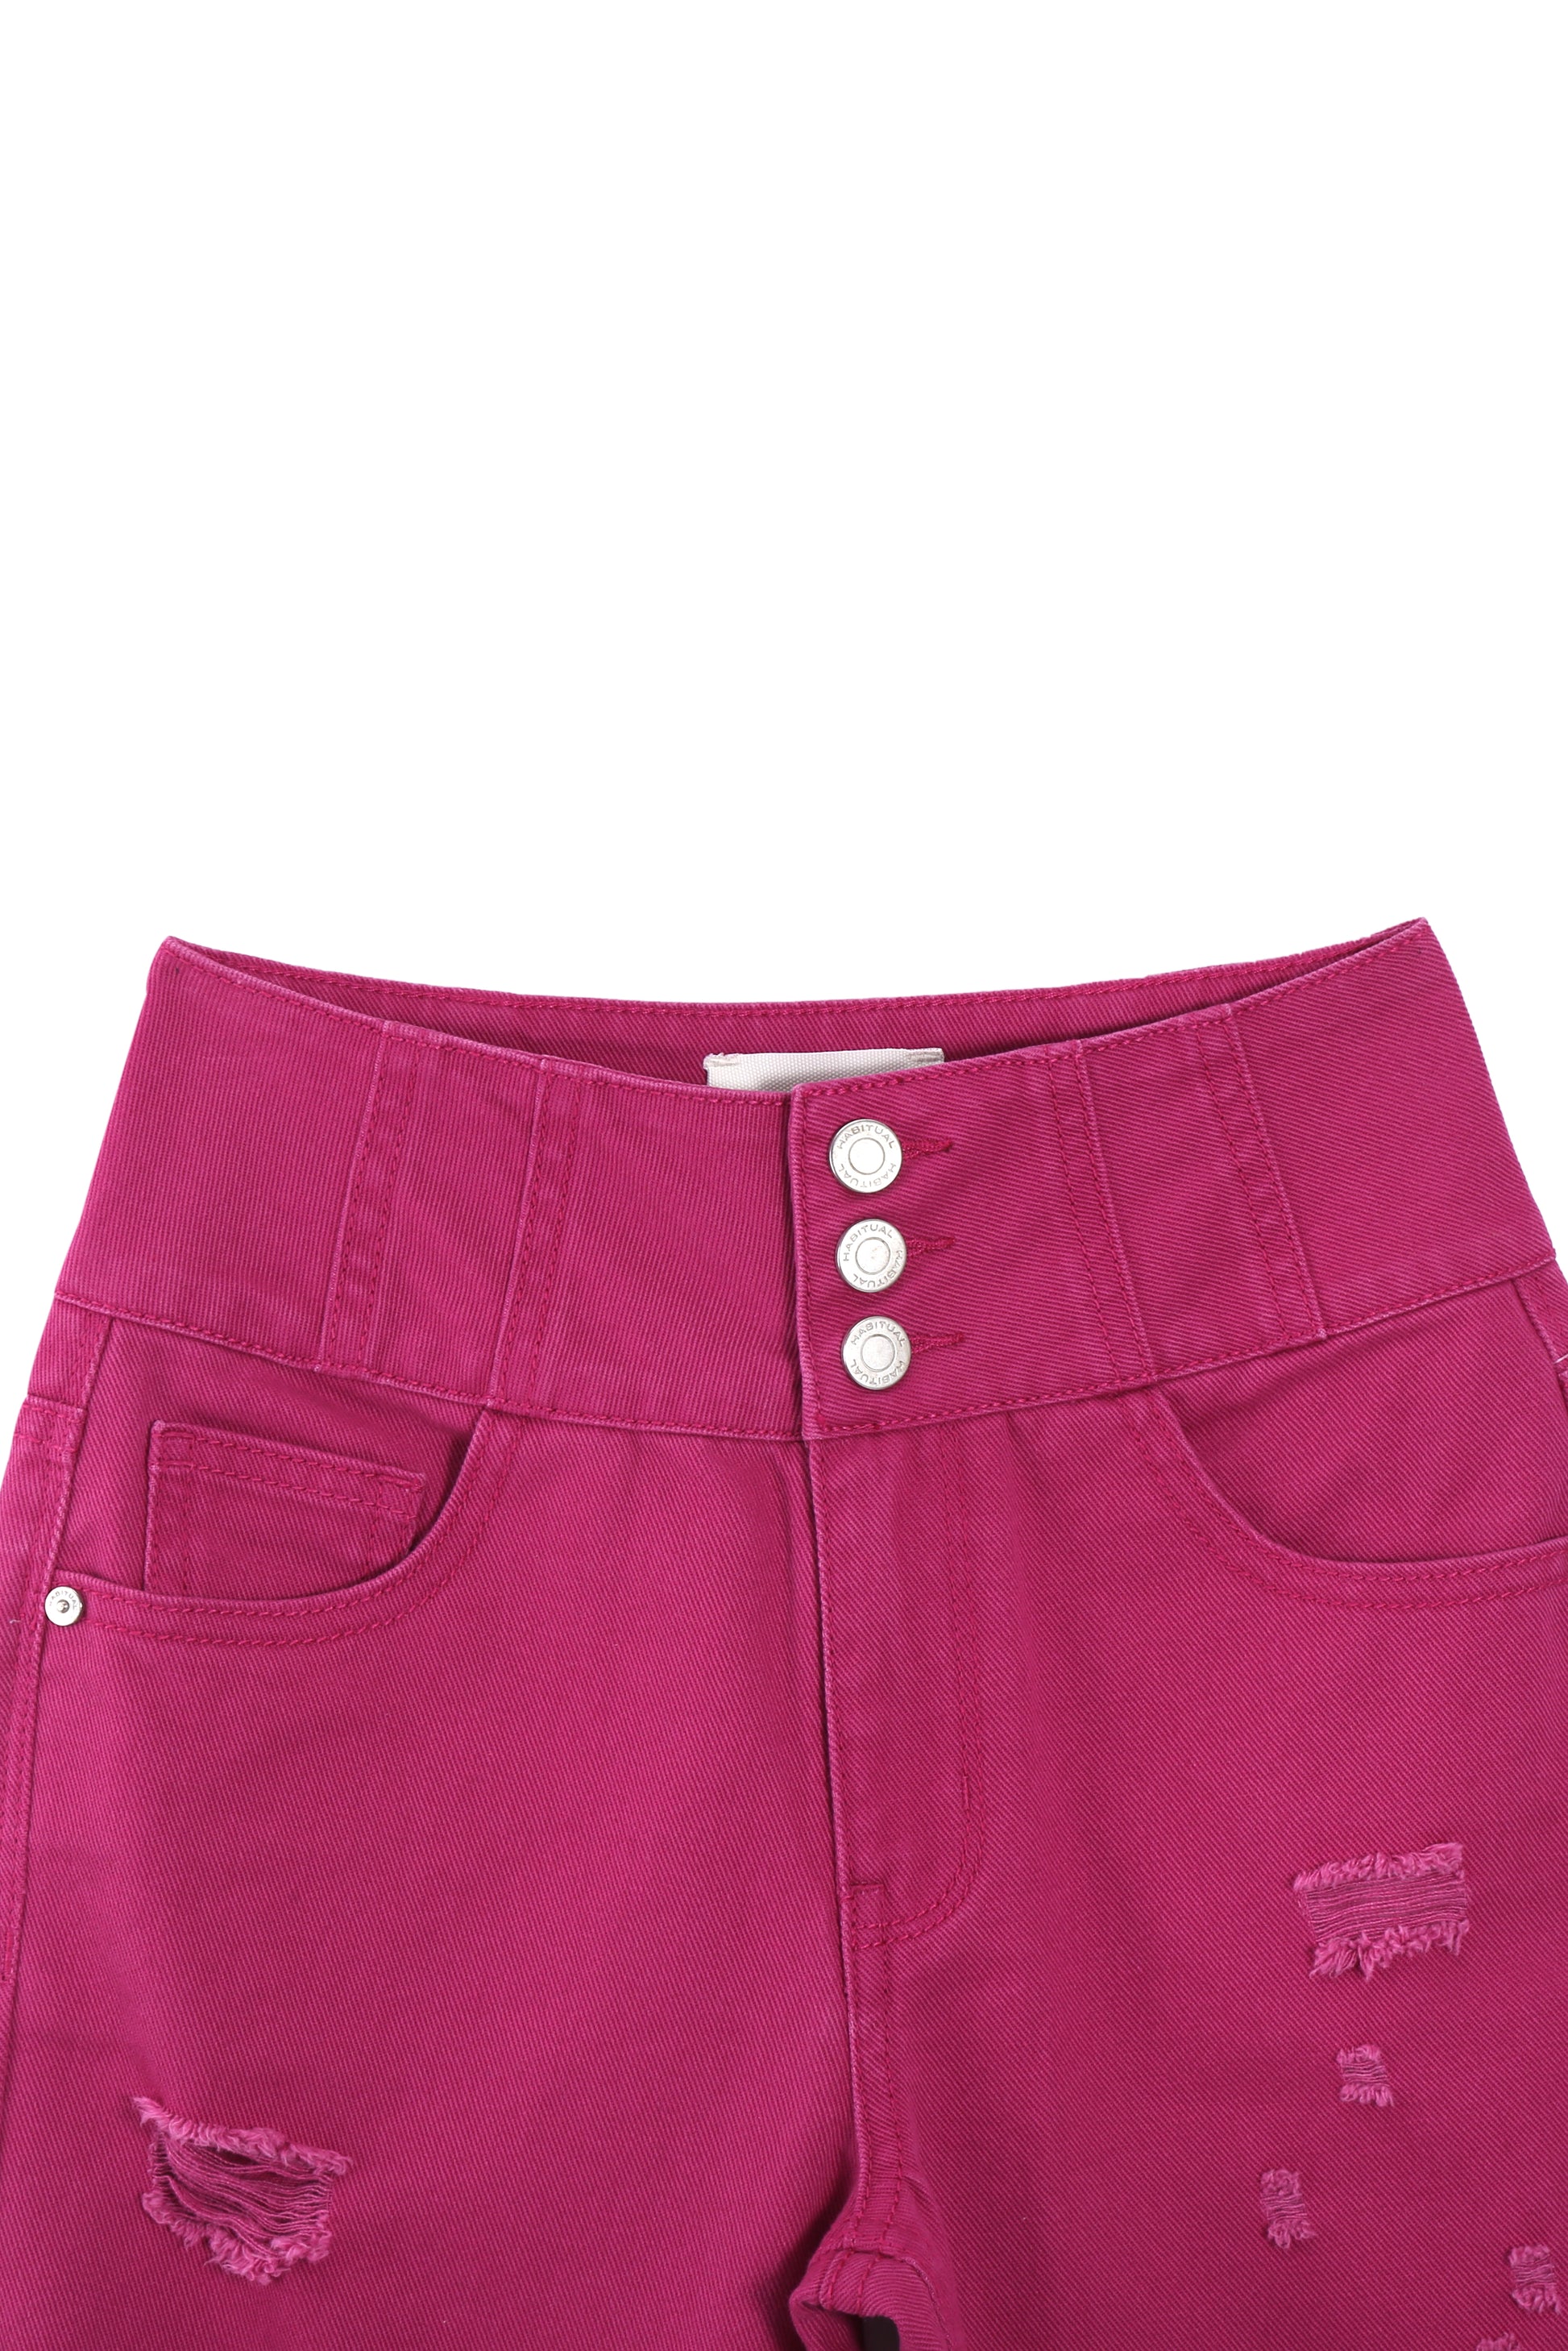 FLAT LAY OF DEEP MAGENTA DISTRESSED CUFFED LEG HIGH RISE JEAN PANT WITH THREE BUTTON CLOSURE AND POCKETS